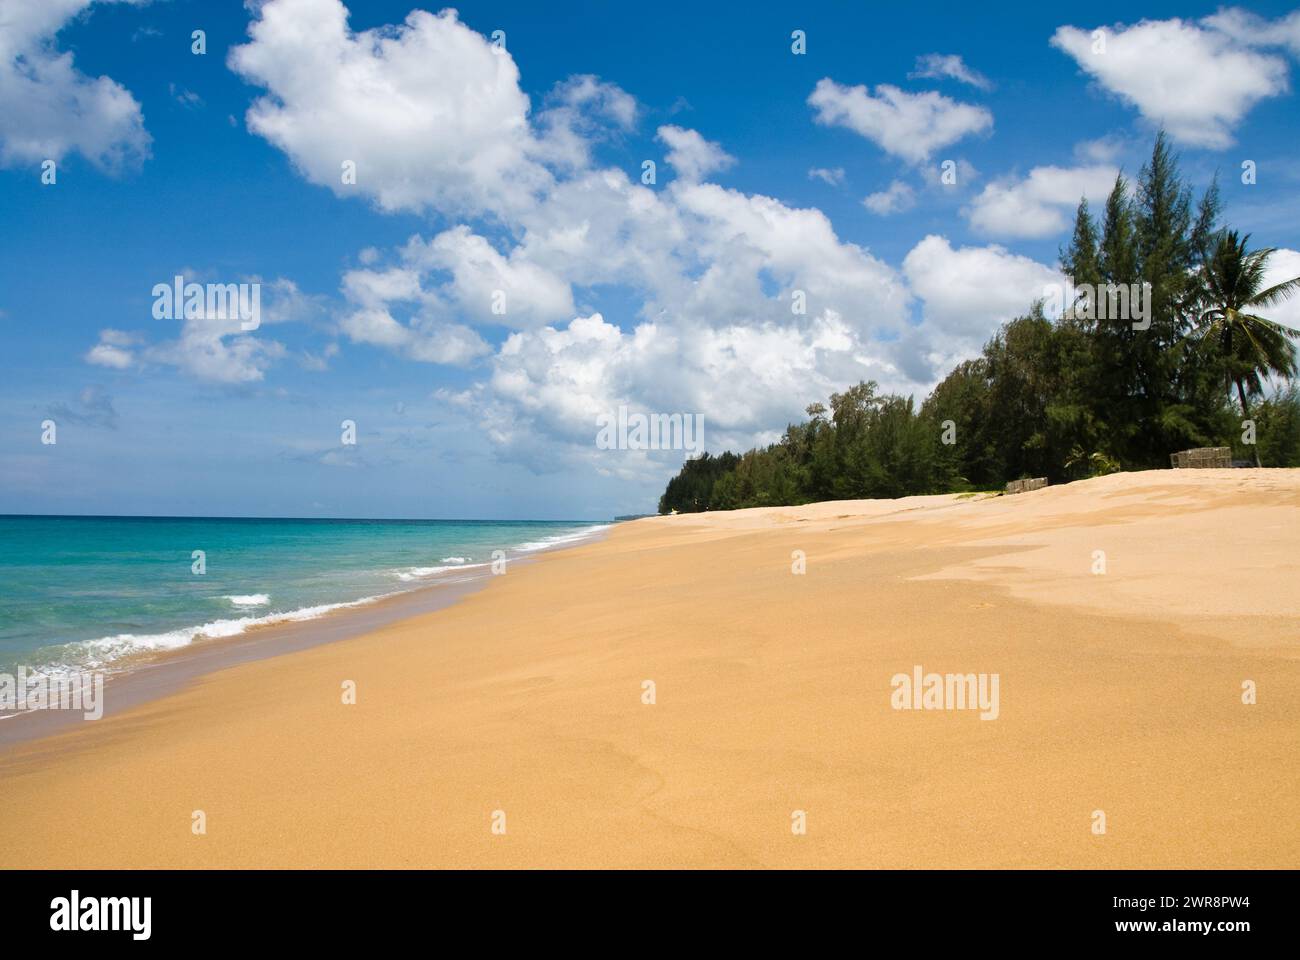 Deserted sandy beach by the clear ocean under a blue sky with clouds Stock Photo